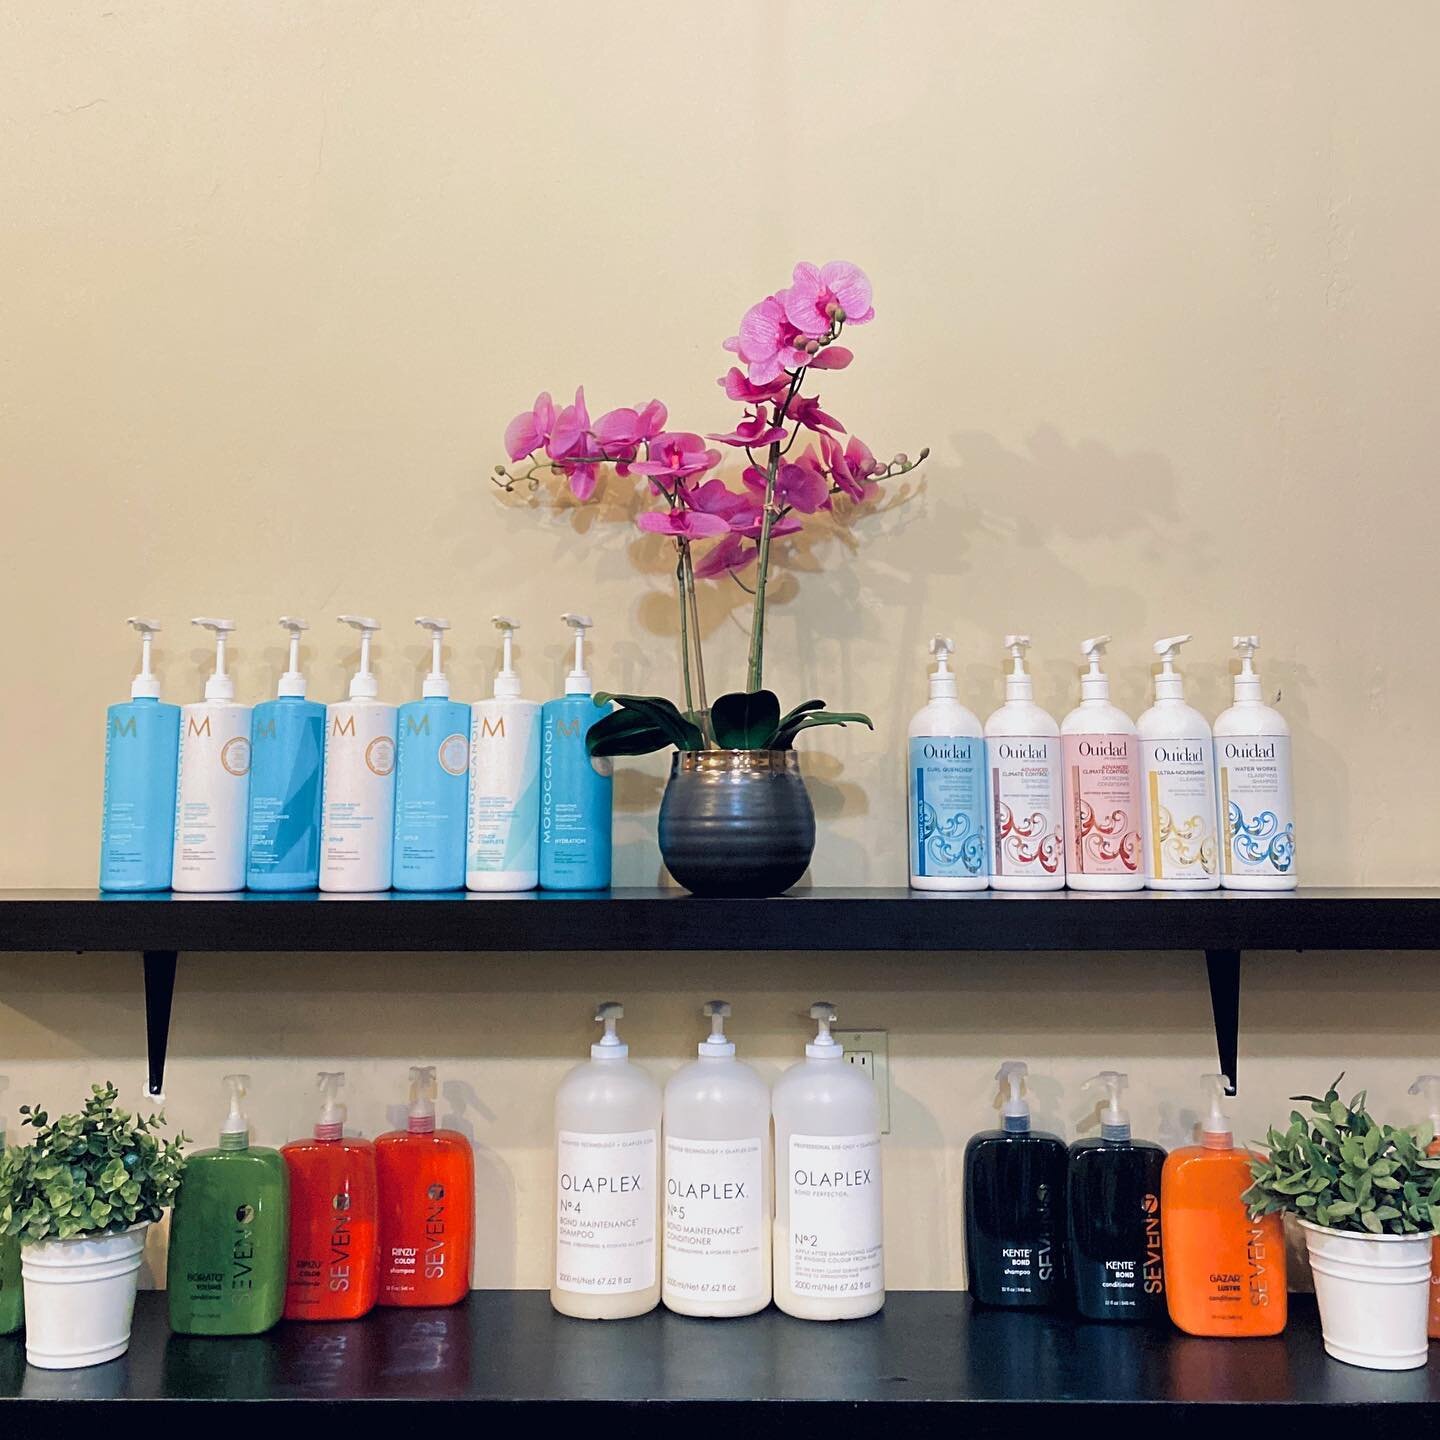 The best products ever. We love our #backbar #olaplex #sevenhaircare #ouidad #moroccanoil